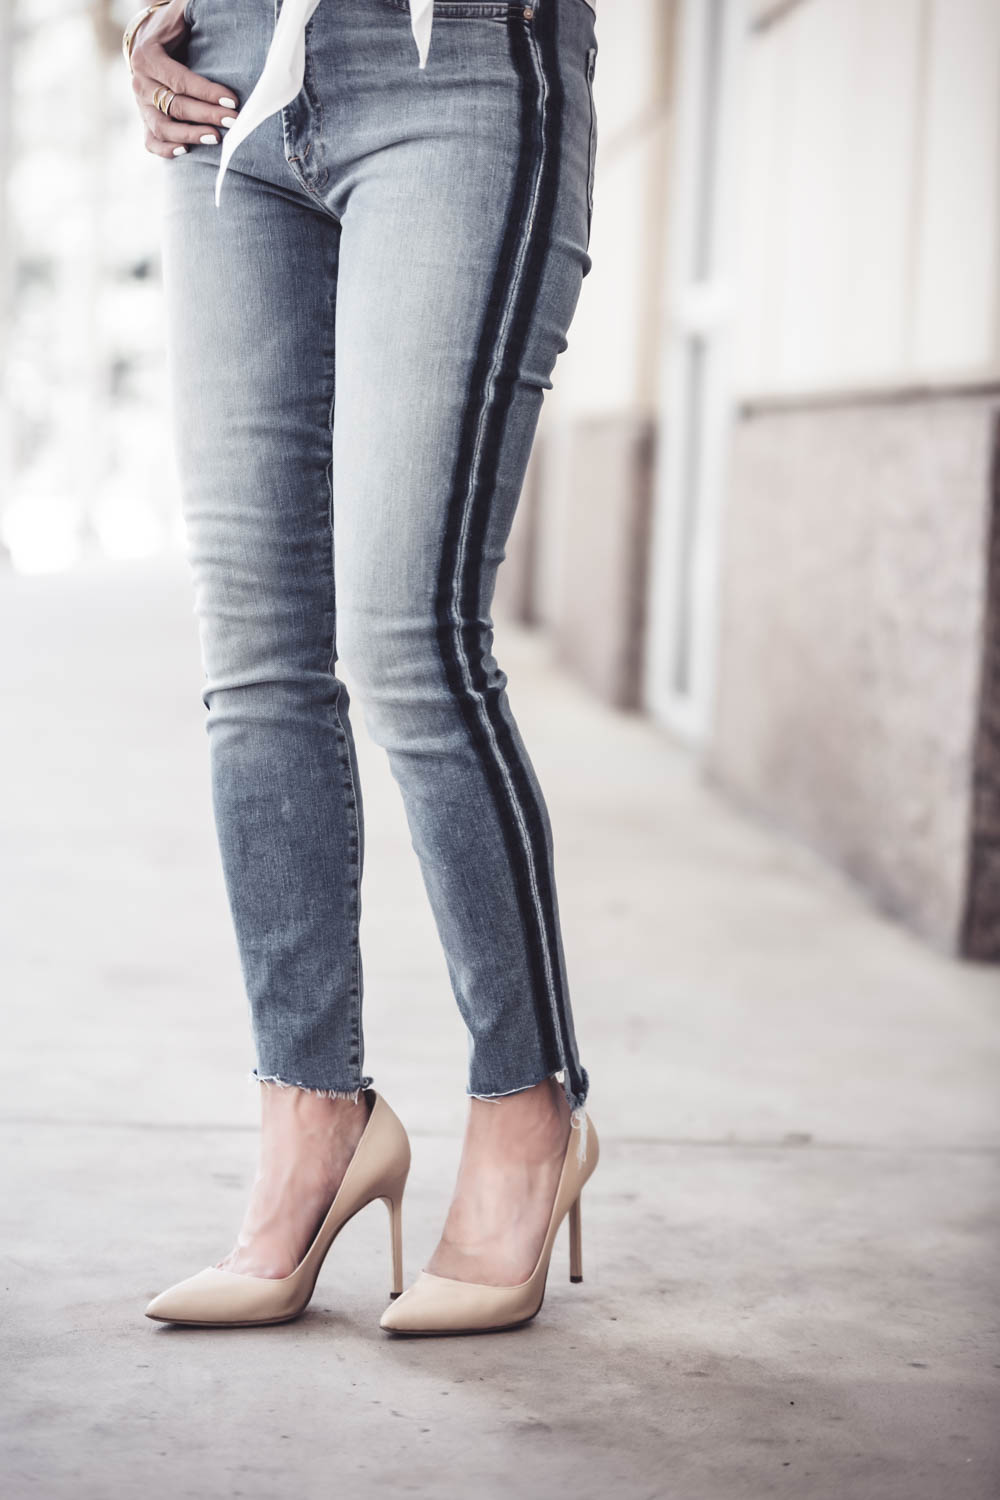 Mother Denim, Mother jeans in stunner ankle fray in kitty racing stripe, Awesome jeans! High rise with a step hem, VERY slimming and elongating